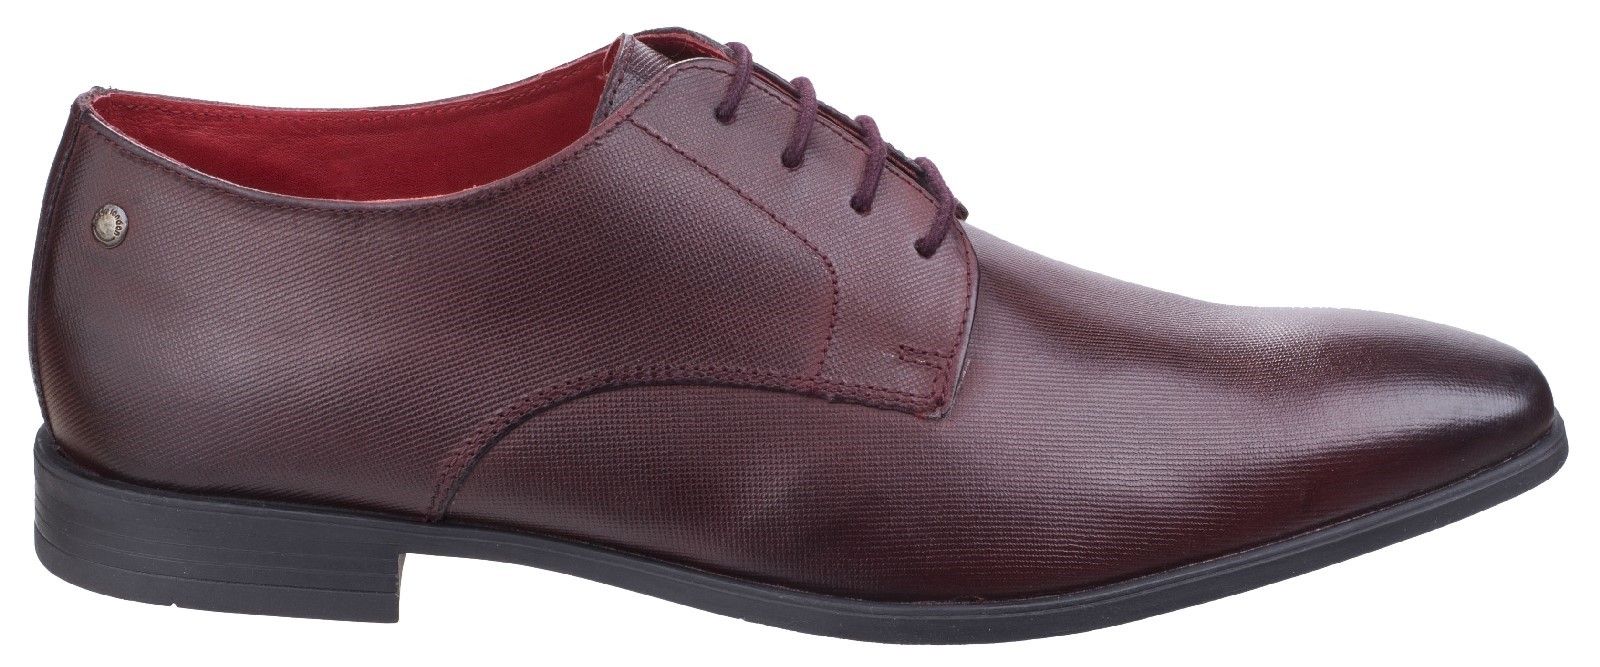 Shilling is a chiselled tip, plain toe derby from the Sterling range. A non-fussy design with simple but effective hold punch detailing on the open lacing. Its textured rubber sole provides a confident step, perfect for the morning commute. High quality waxy leather with deep shine. 
High quality leather lining.